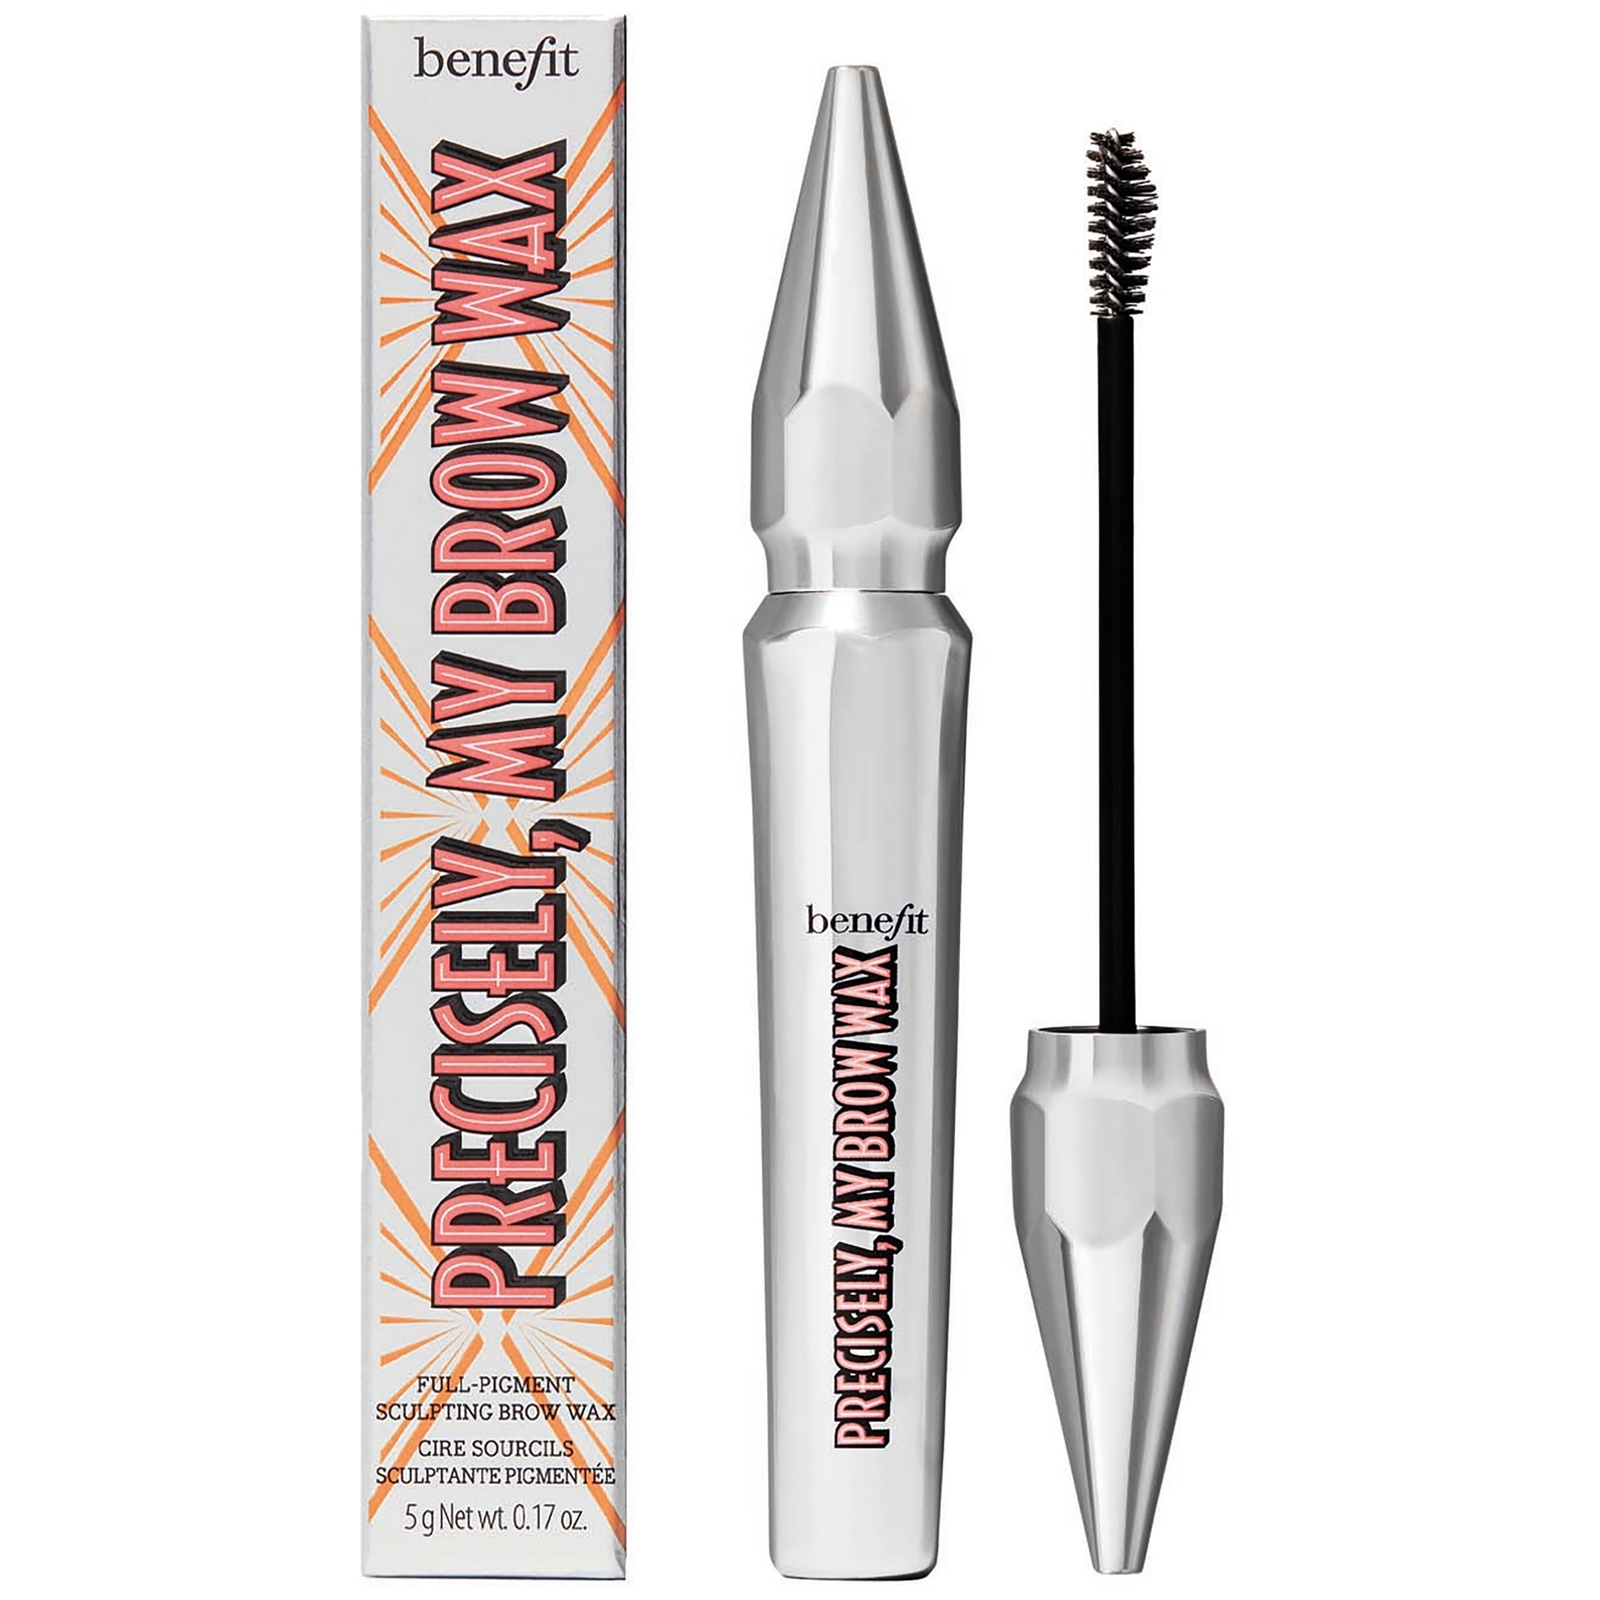 benefit Precisely My Brow Full Pigment Sculpting Brow Wax 5g (Various Shades) - 5 Warm Black-Brown